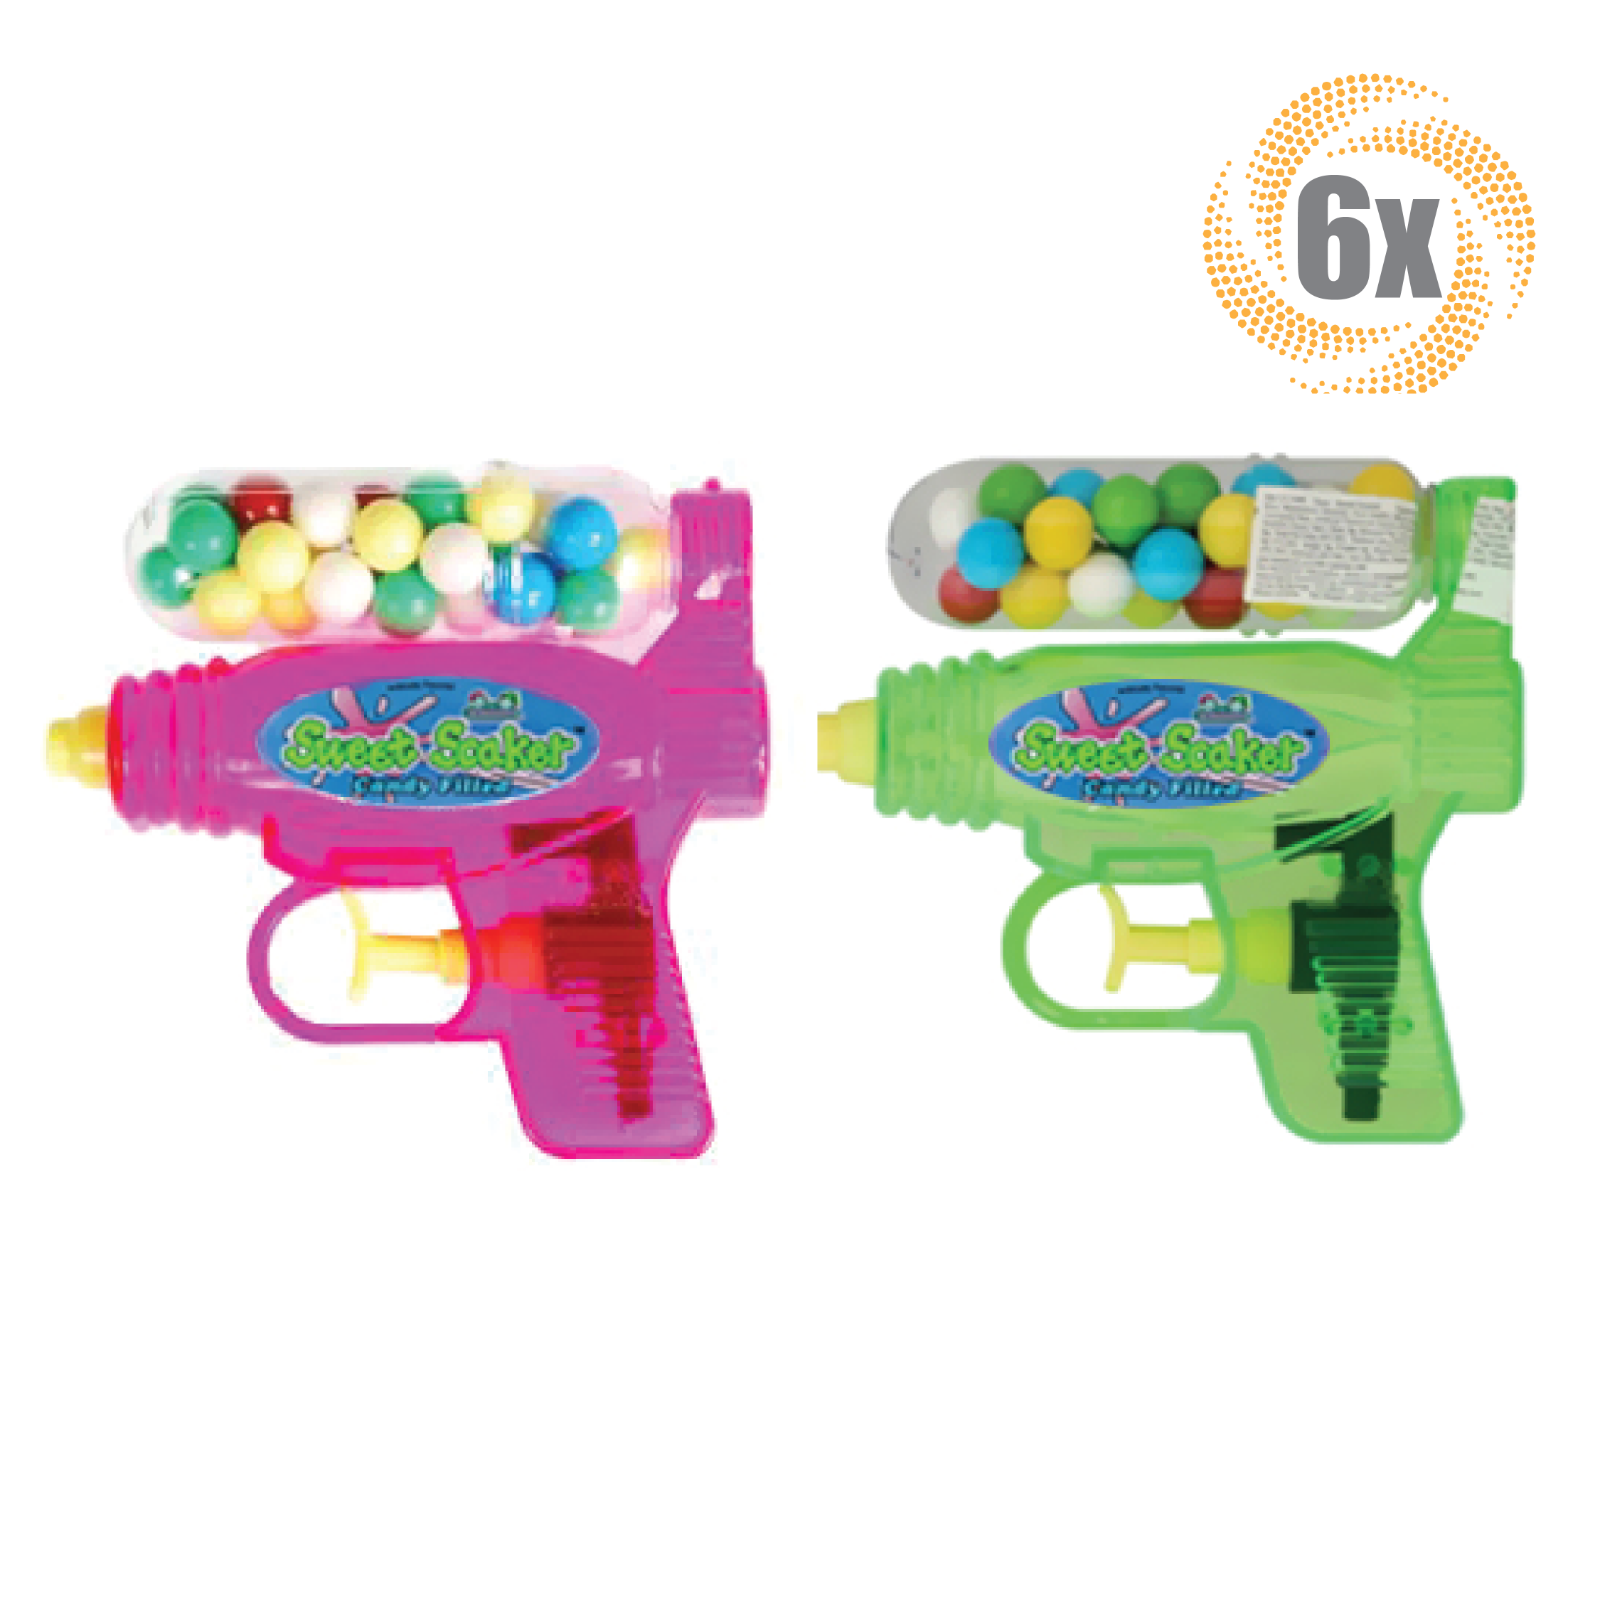 6x Candy Factory Sweet Soaker Water Pistol Assorted Fruit Flavor Candy .74oz - $17.23